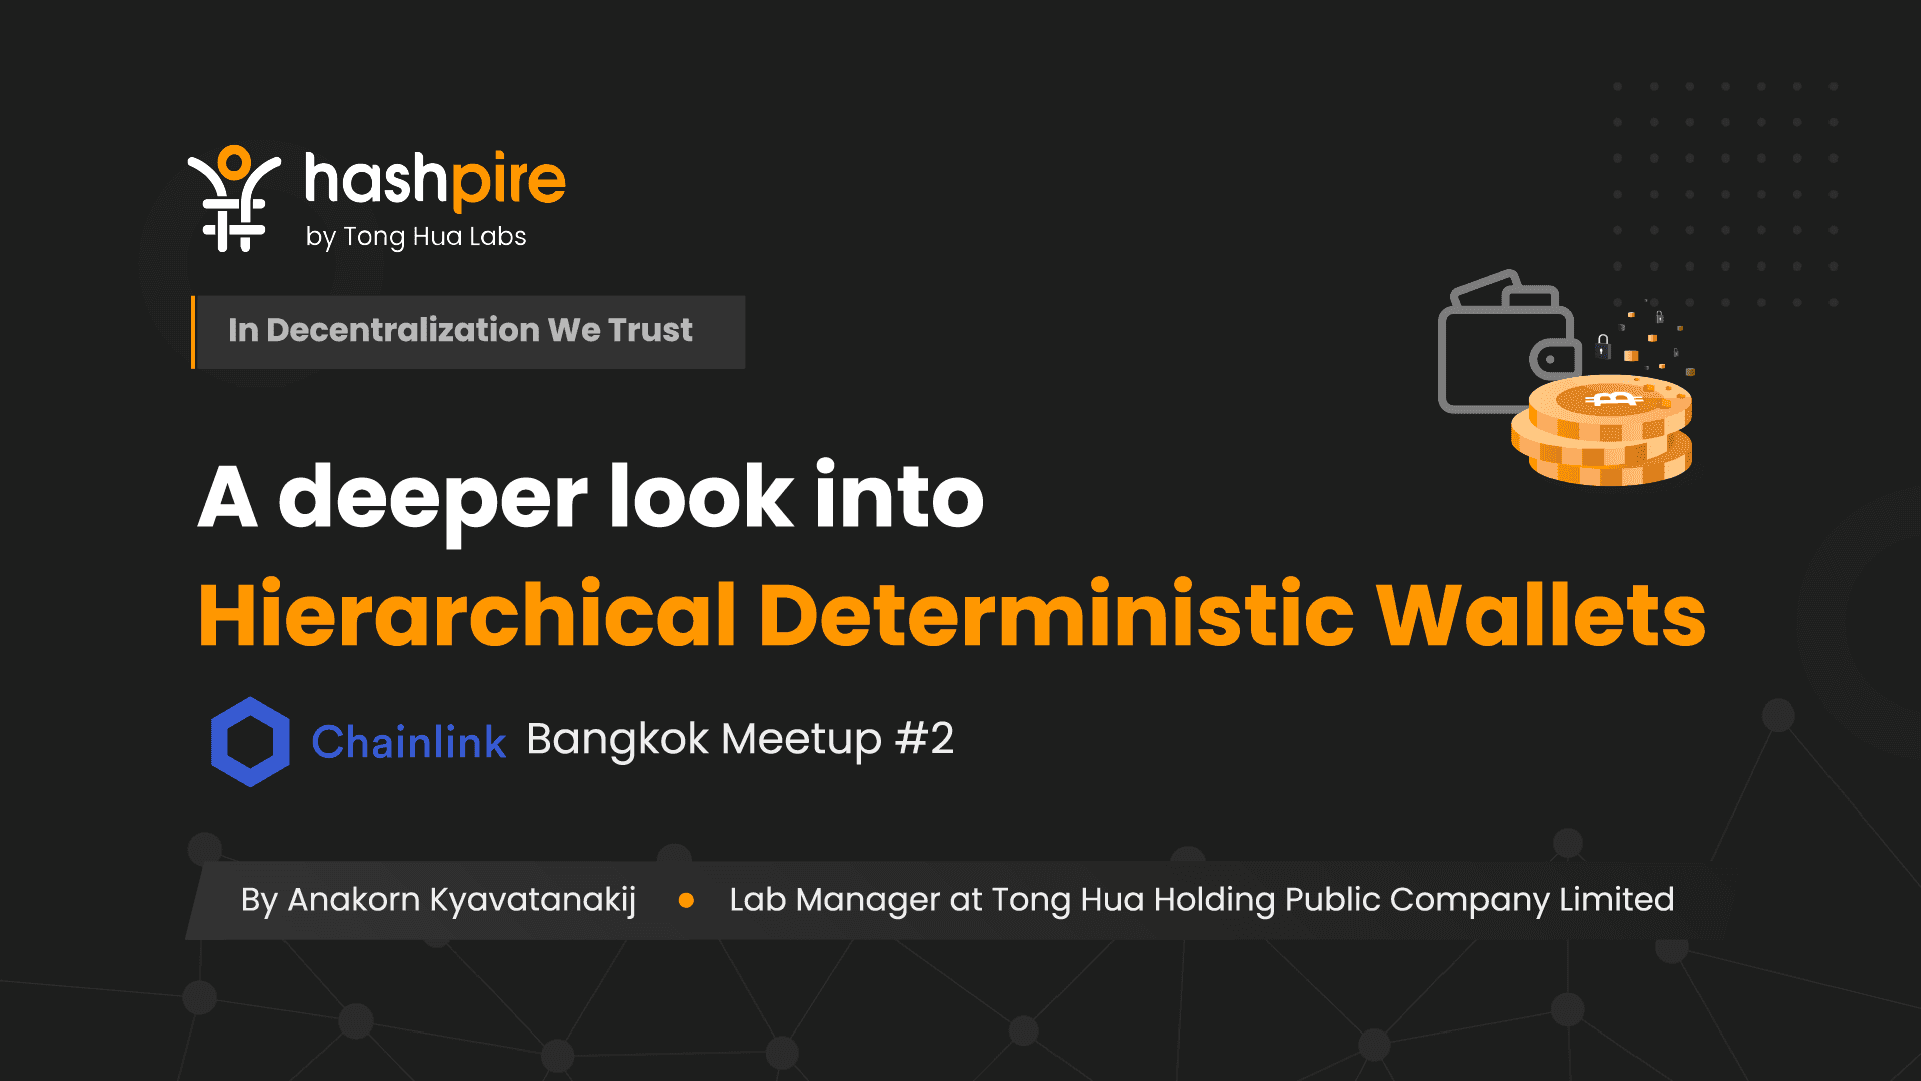 A deeper look into Hierarchical Deterministic Wallets